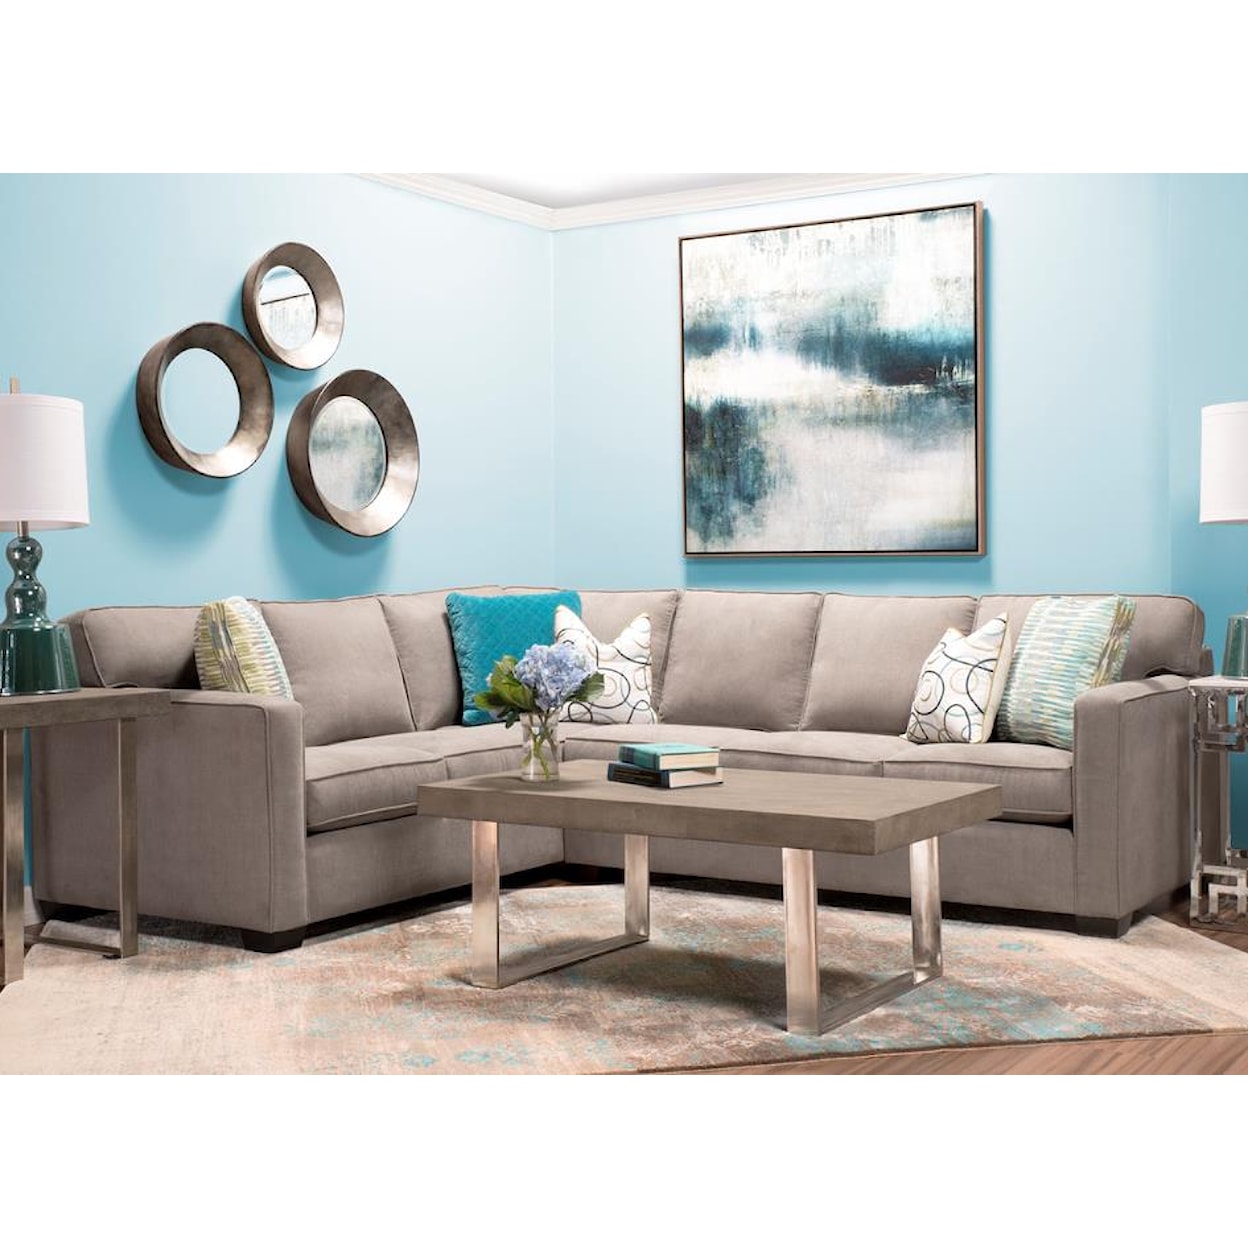 Lewis Home 5901 Casual Sectional